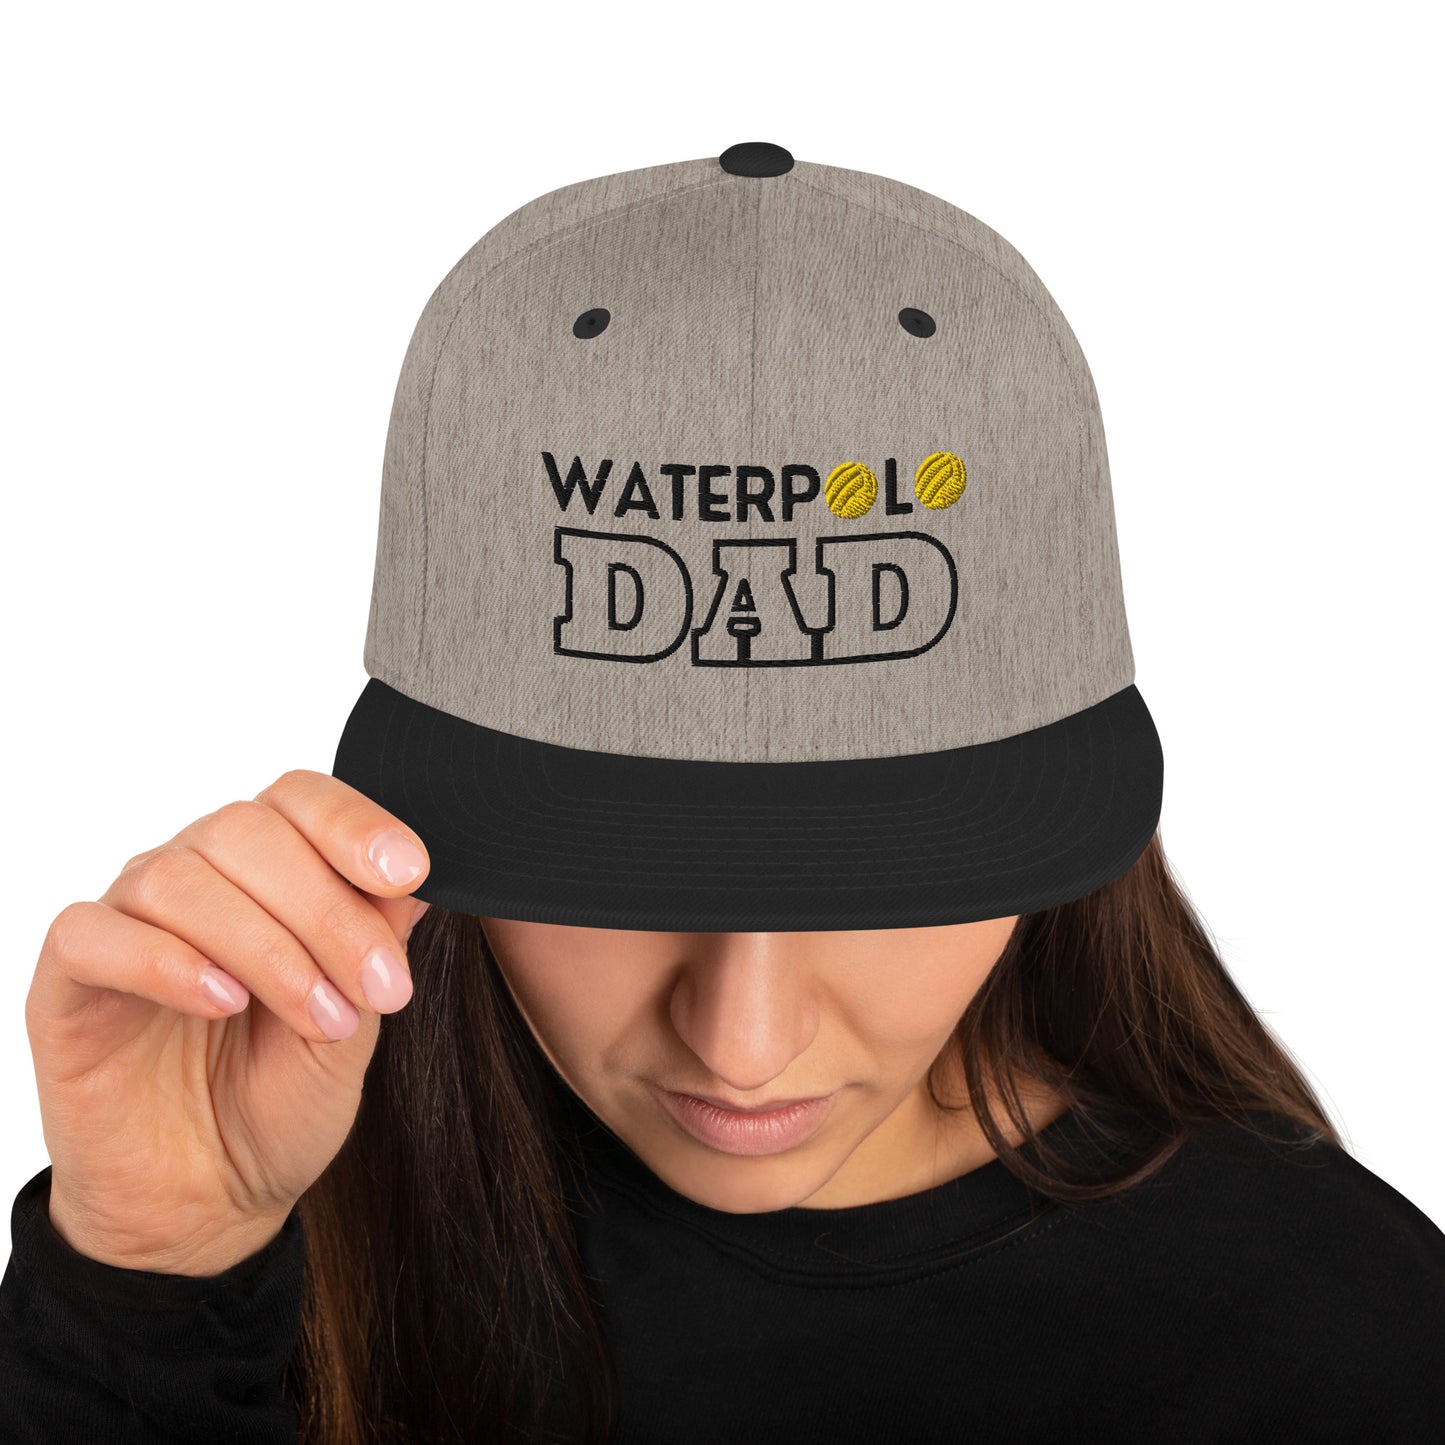 Waterpolo Dad - Classic Snapback | Yupoong 6089M